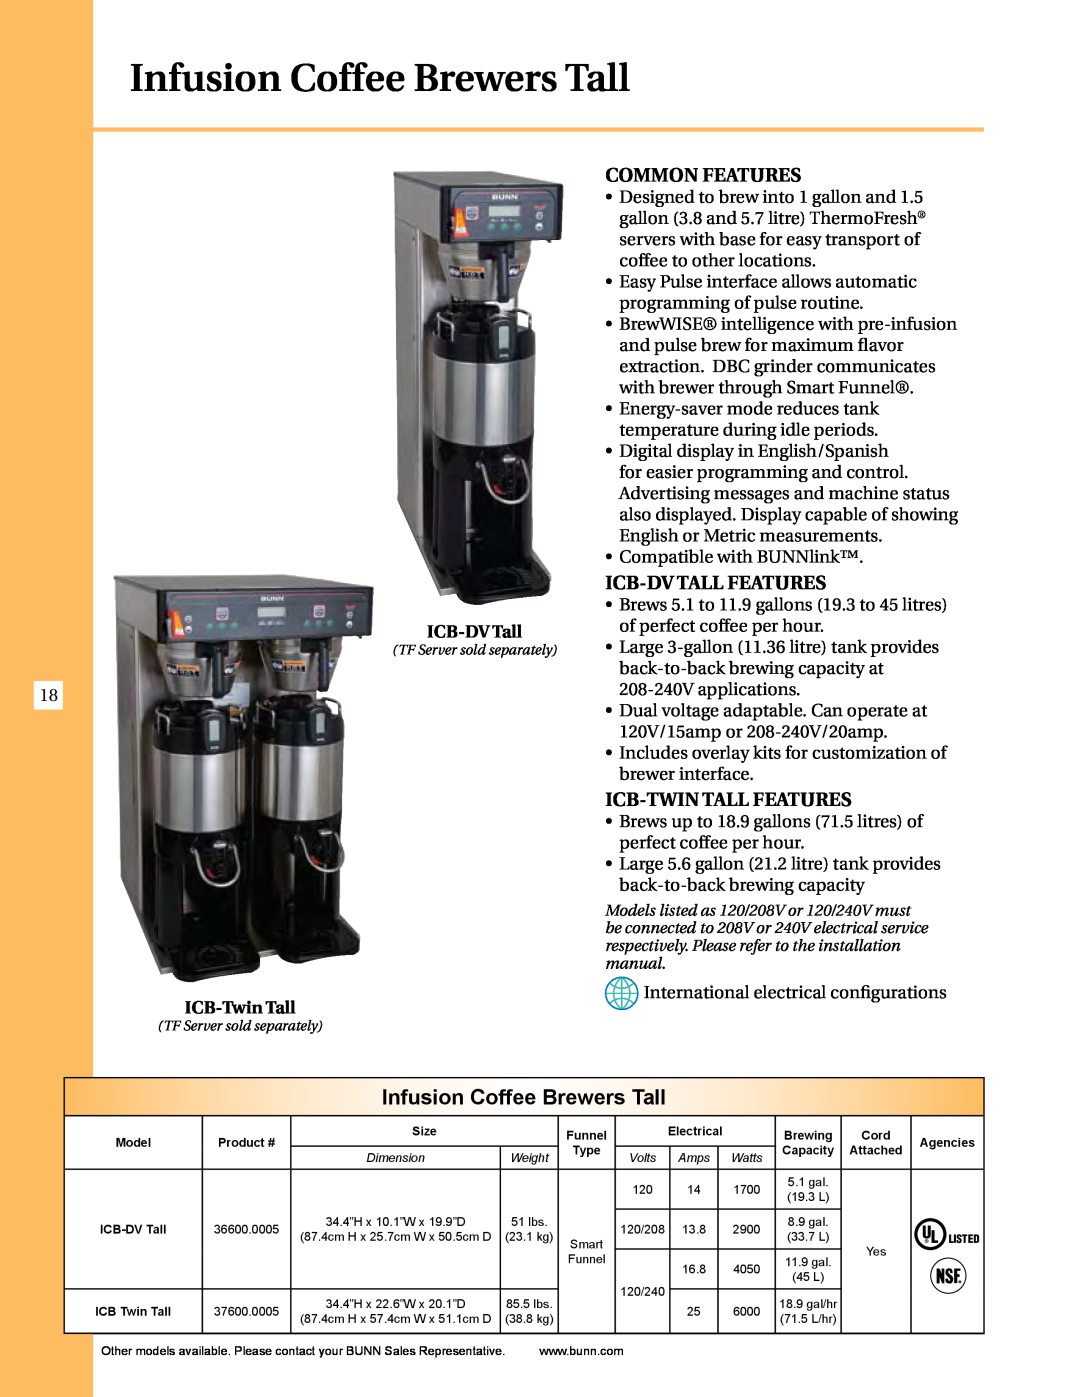 Thermal Comfort ICB-TWIN manual Infusion Coffee Brewers Tall, Common Features, Icb-Dv Tall Features, Icb-Twin Tall Features 